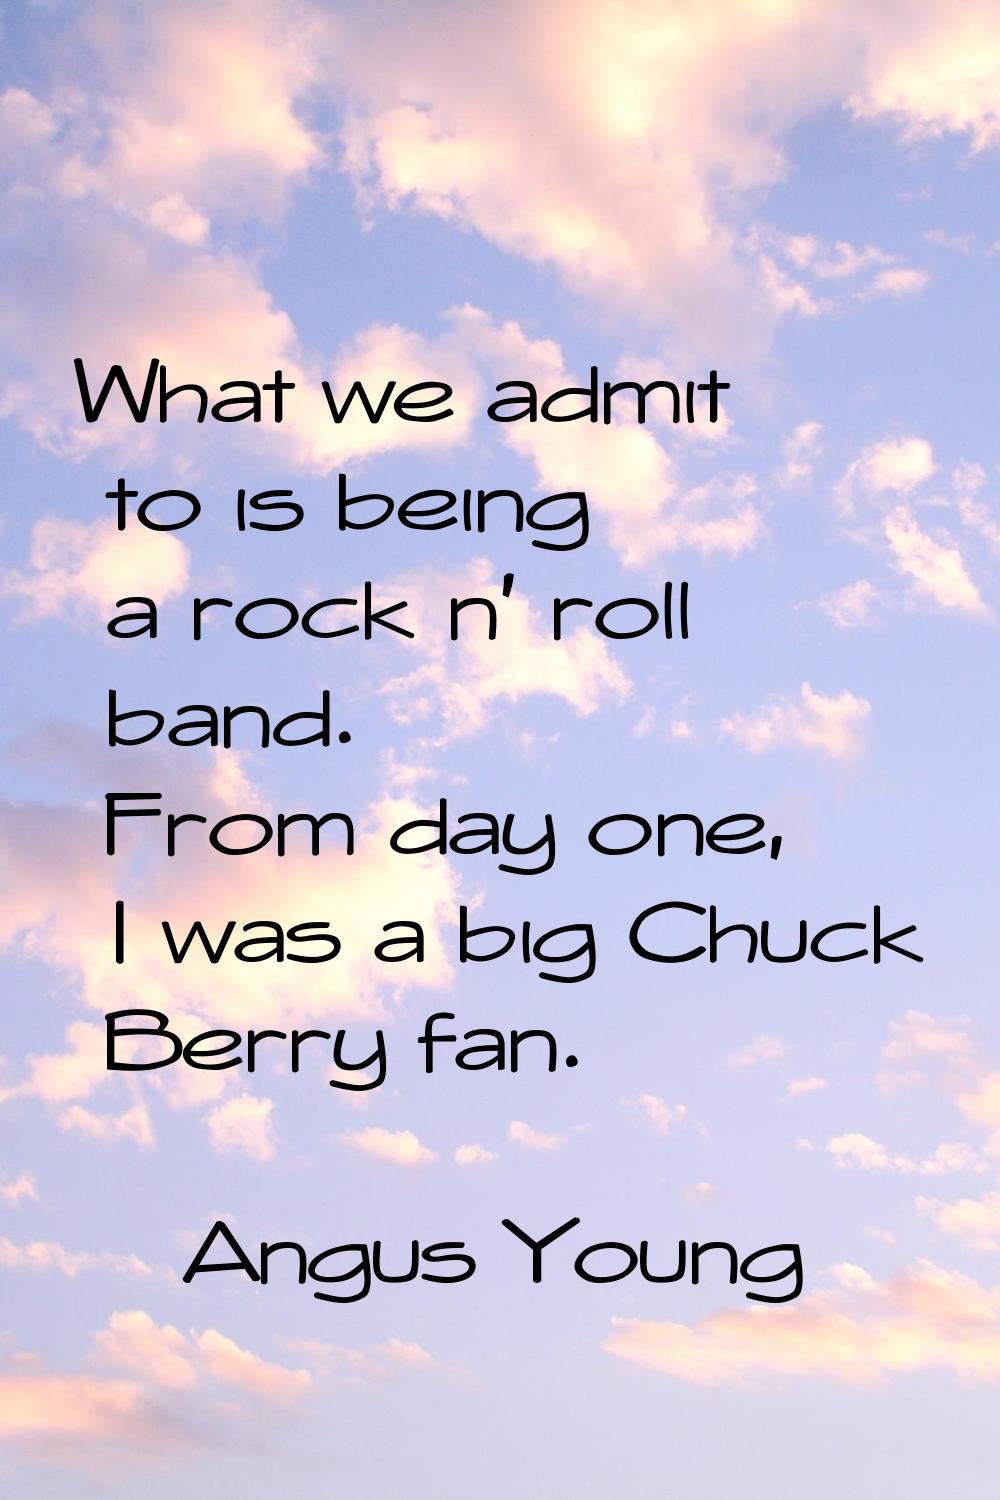 What we admit to is being a rock n' roll band. From day one, I was a big Chuck Berry fan.